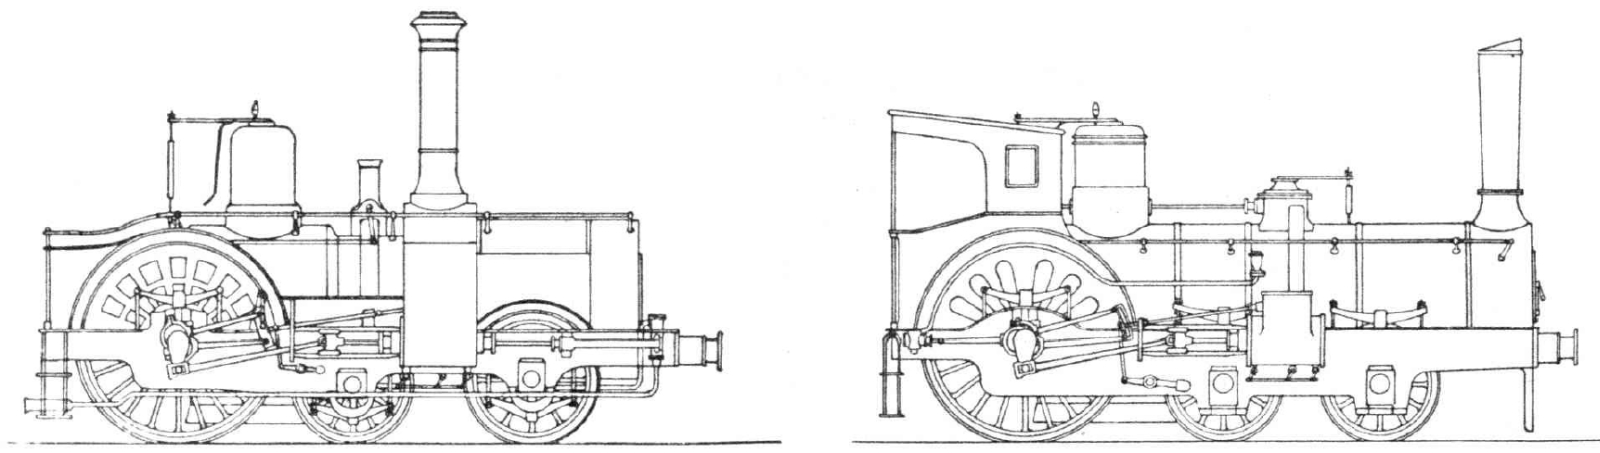 Comparison of the first design with a chimney located to the rear and the fourth series from 1863